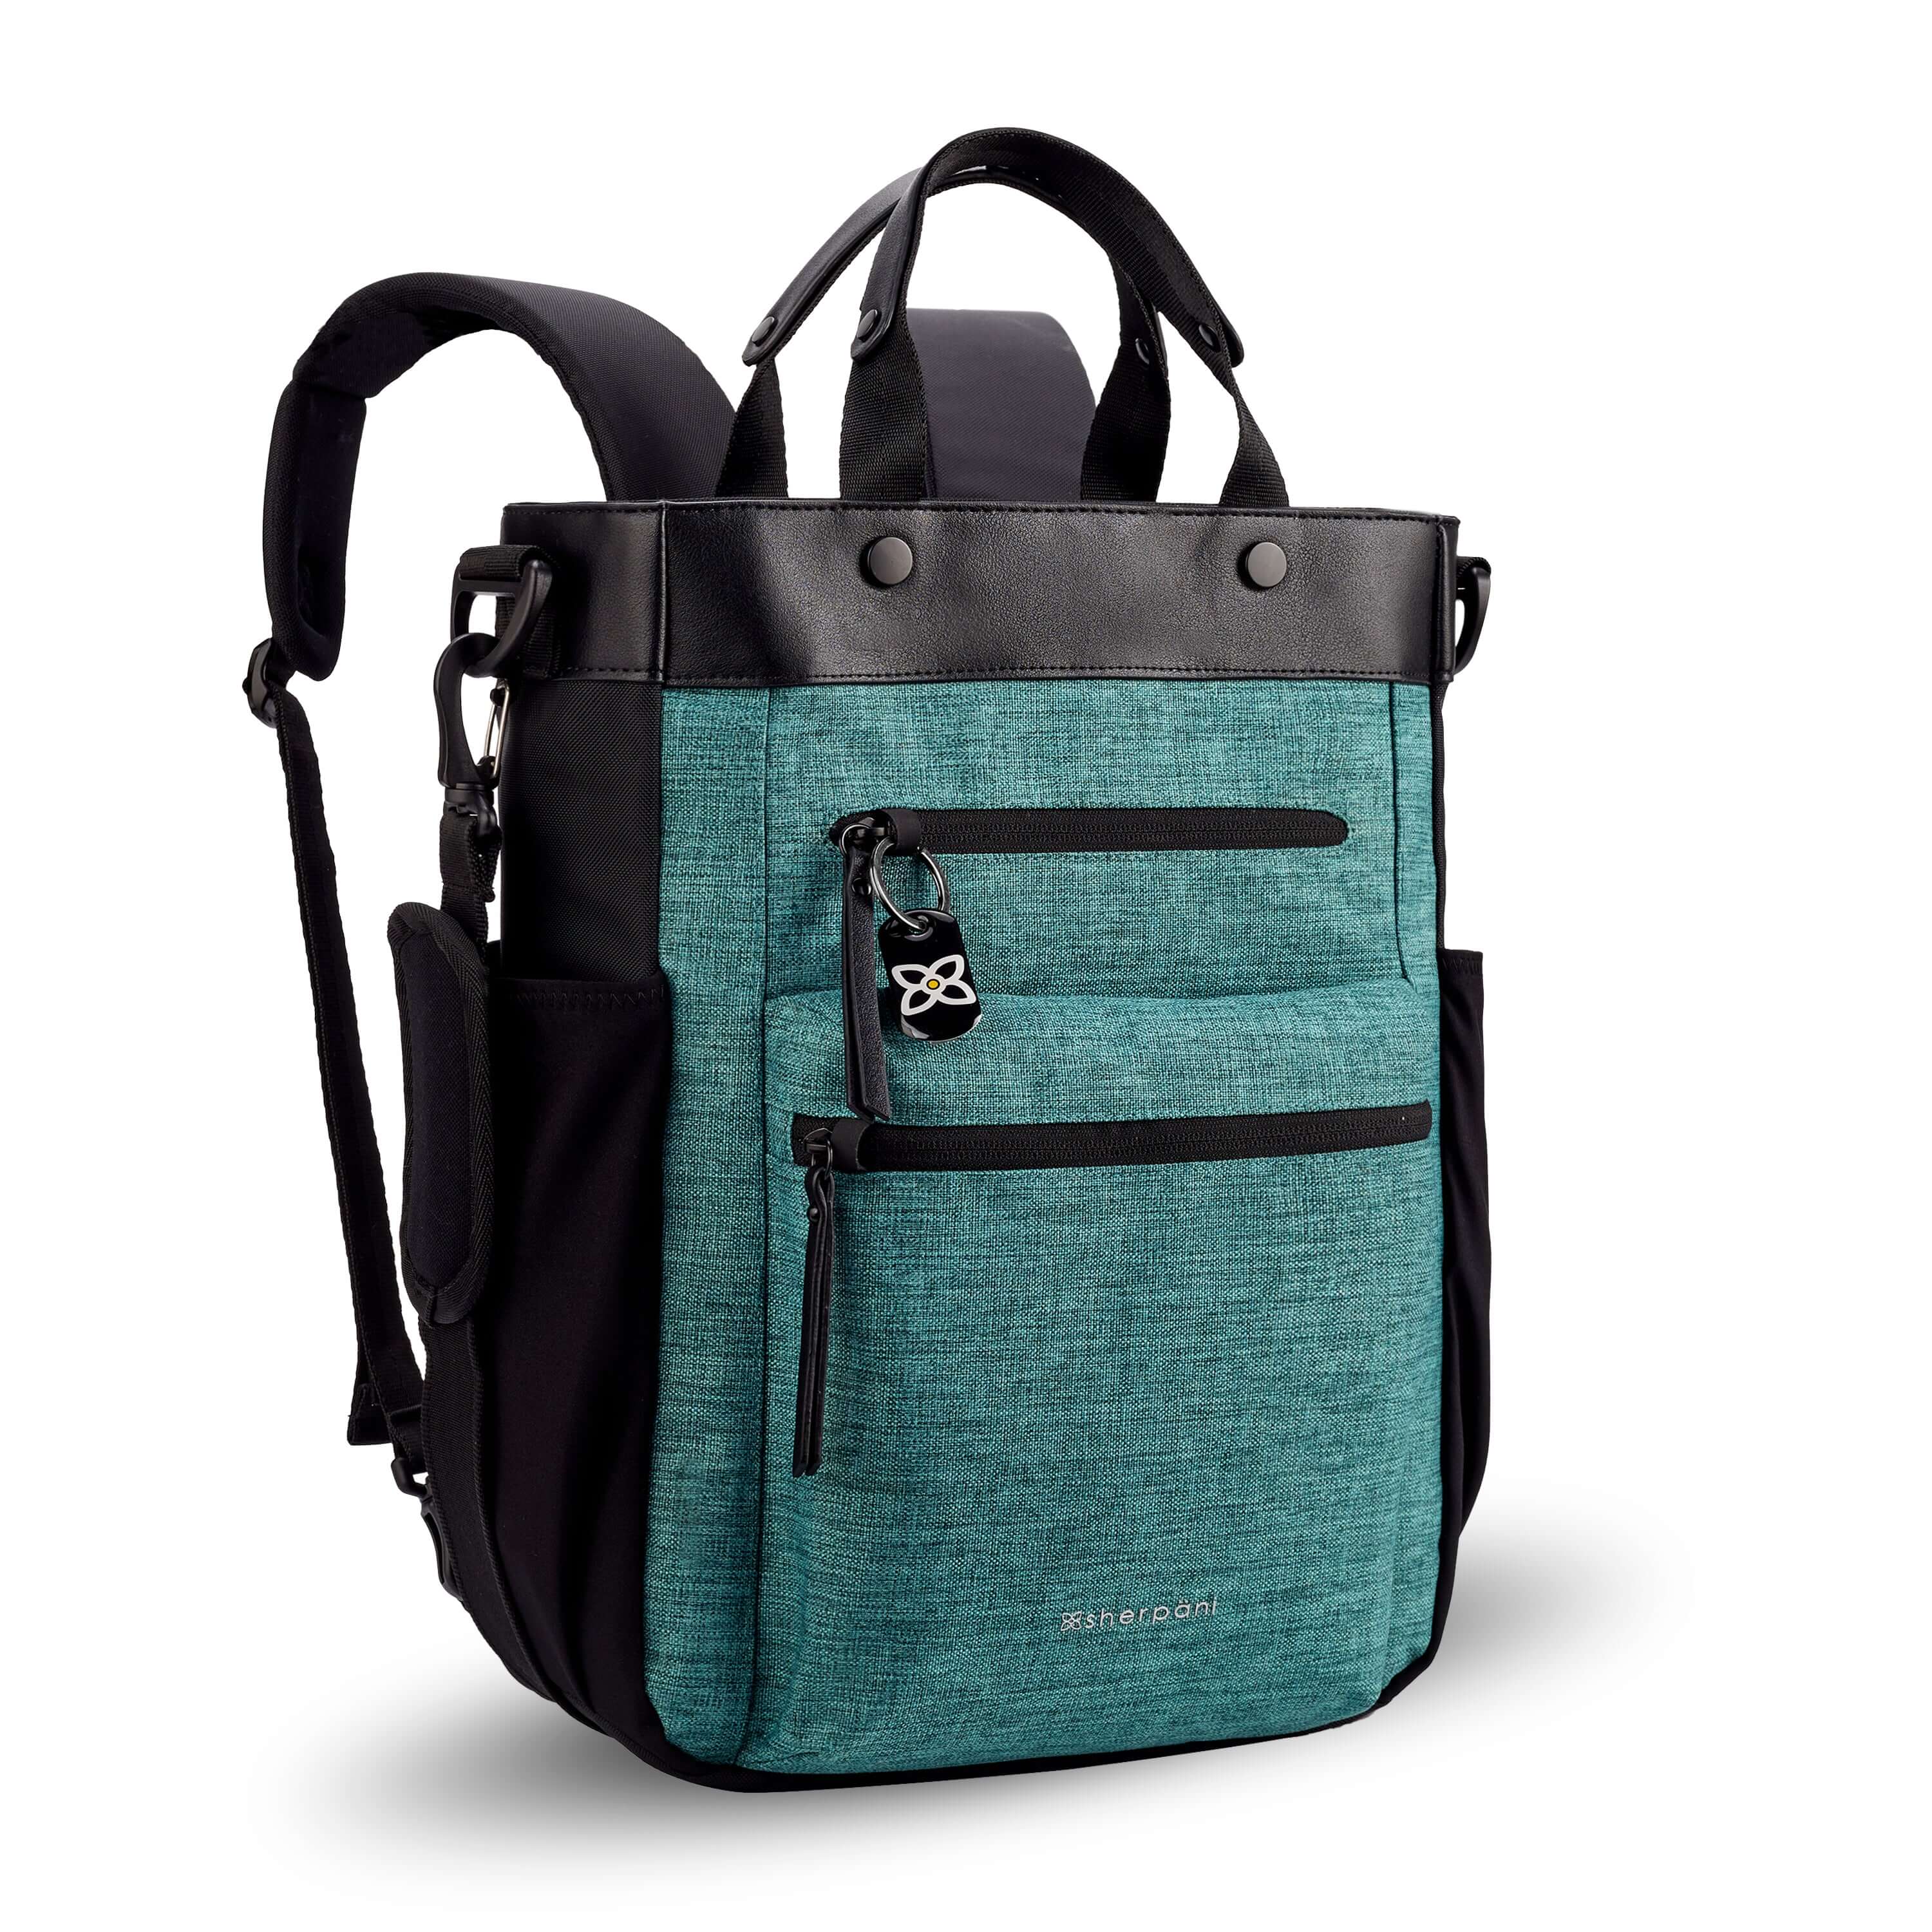 Angled front view of Sherpani's Anti-Theft bag, the Soleil AT in Teal, with vegan leather accents in black. On the front are two locking zipper compartments, a ReturnMe tag is clipped to the upper one. Two elastic water bottle holders sit on either side of the bag. It has padded backpack straps, short tote handles, and an adjustable/detachable crossbody strap. #color_teal